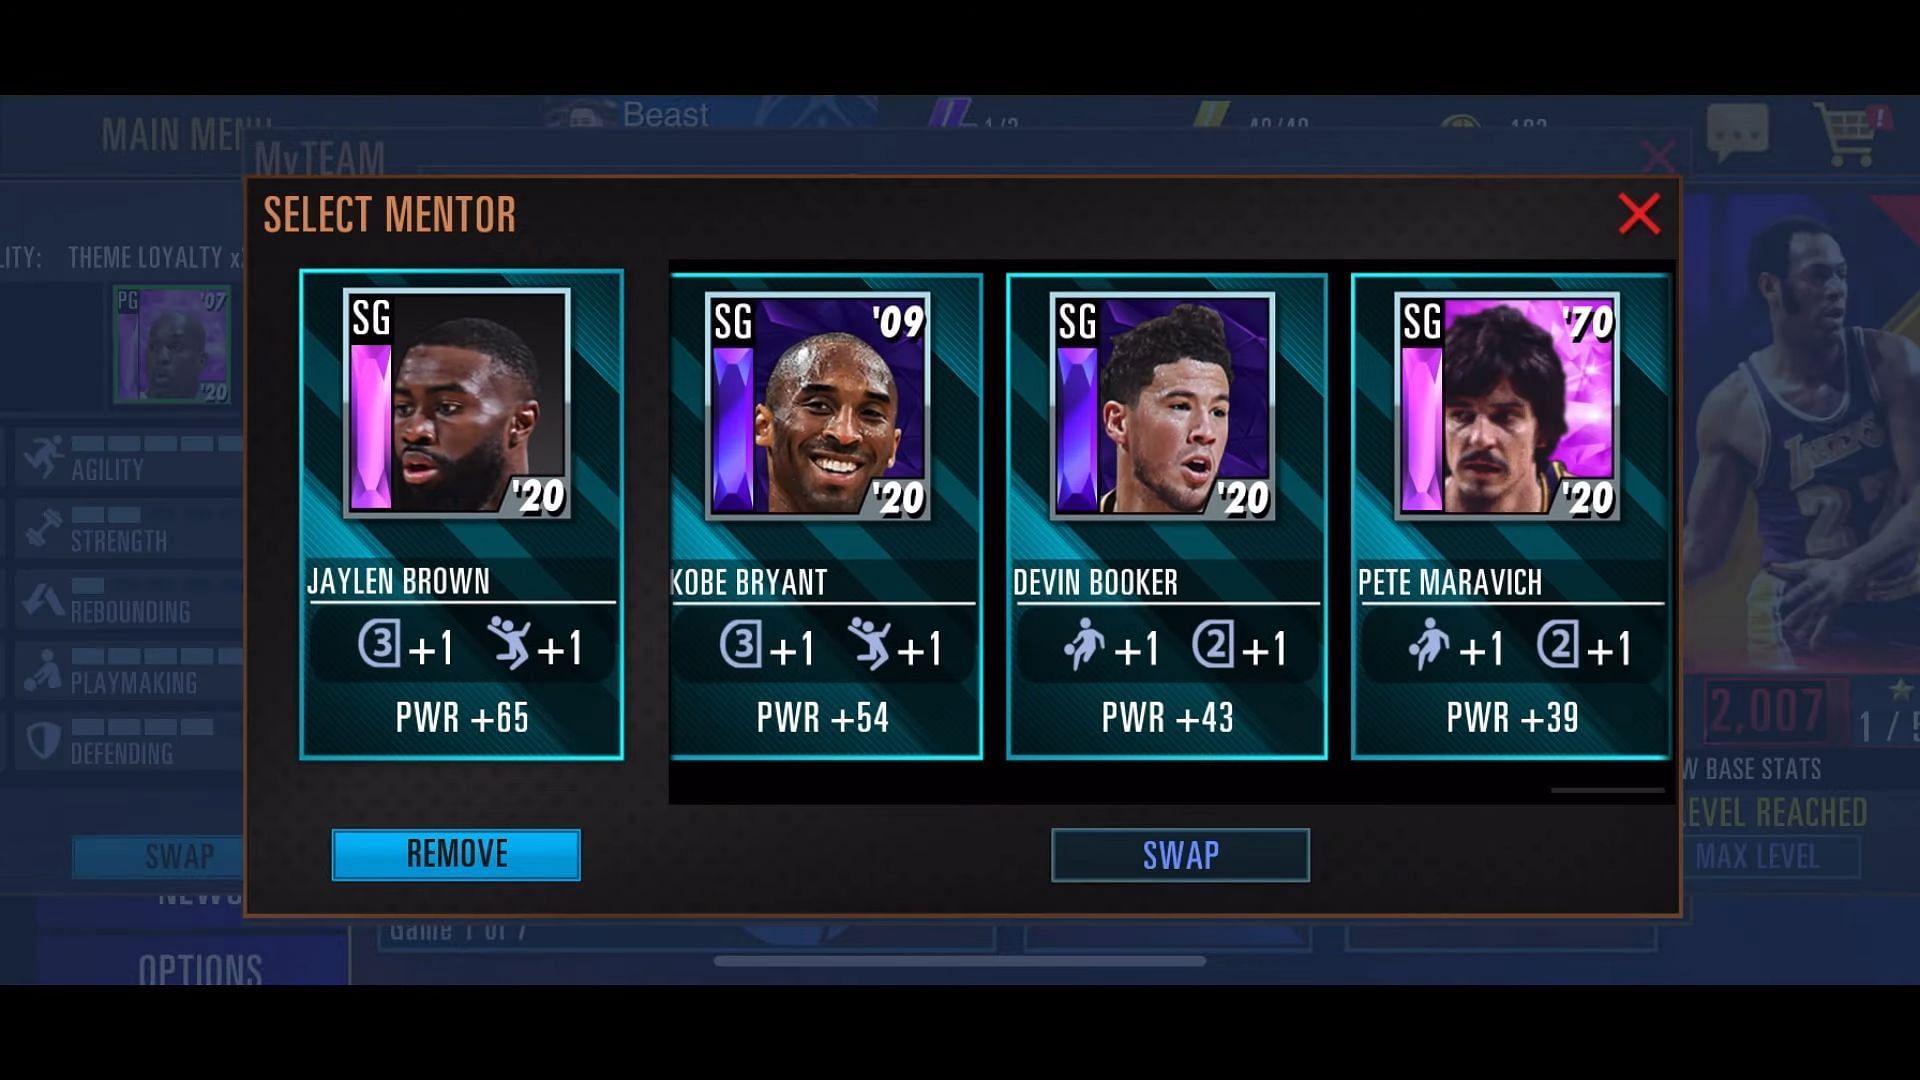 You can easily get mentors in NBA 2K Mobile (Image via 2K Sports)